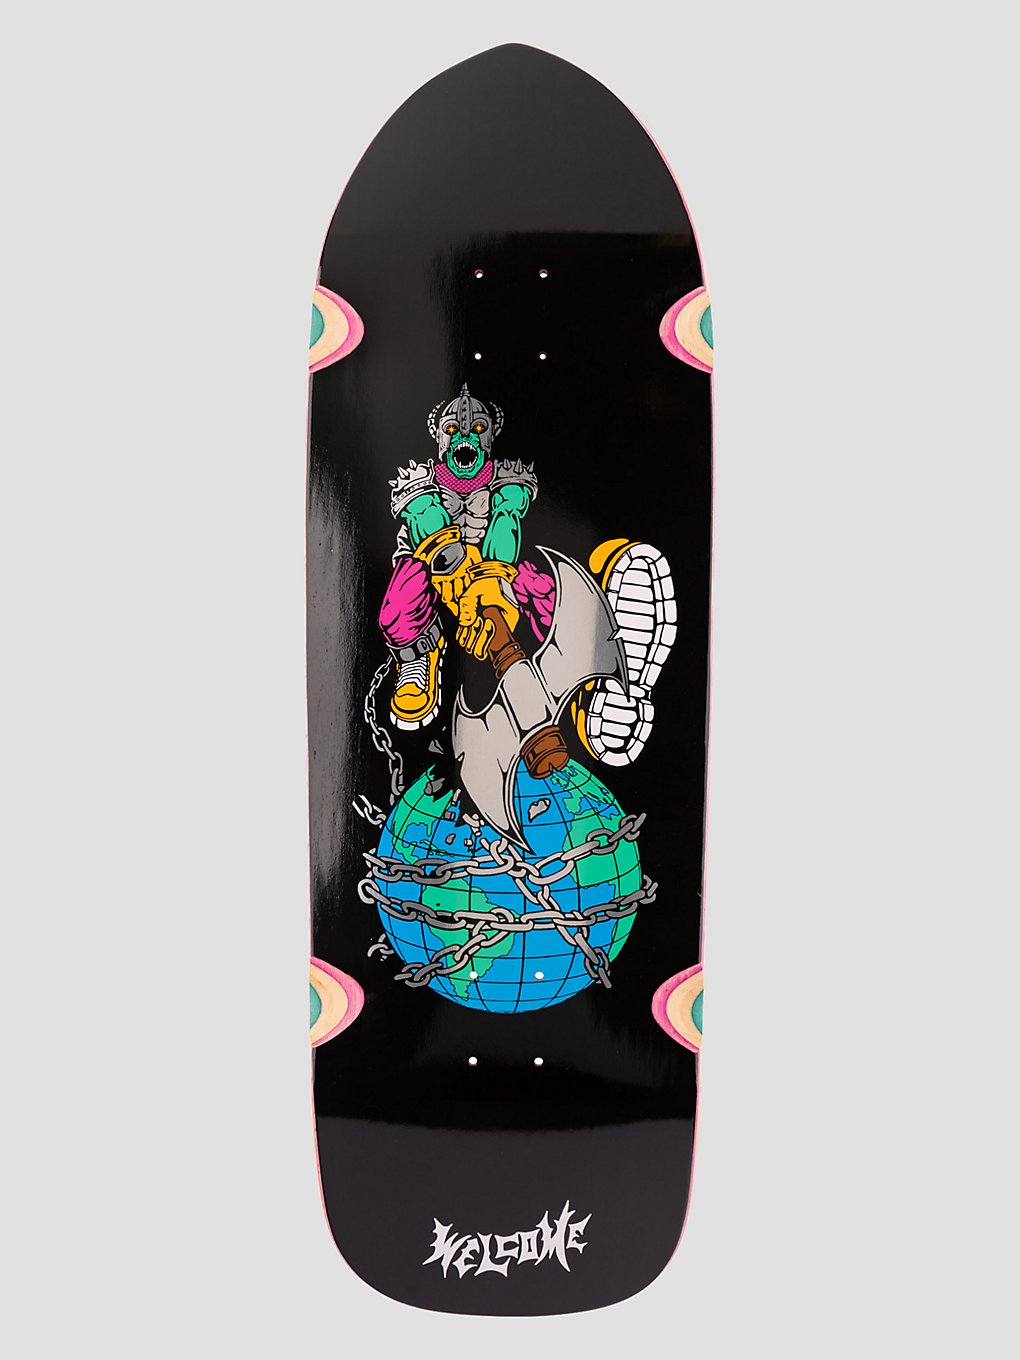 Welcome Unchained On Magic Bullet 2.0 10.4" Skateboard Deck black kaufen